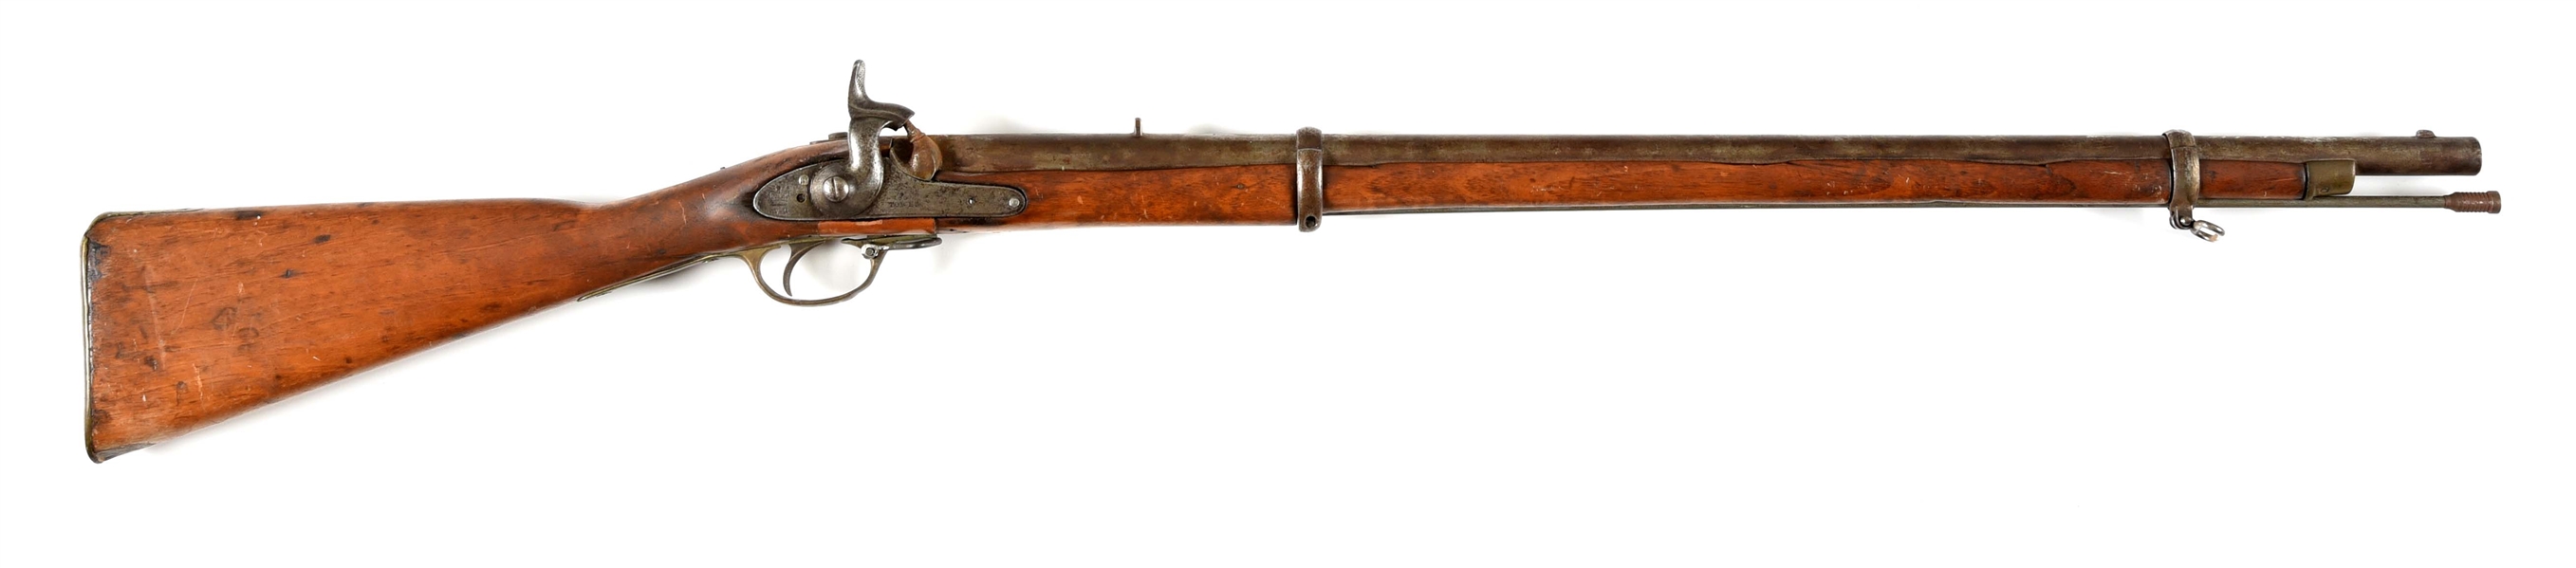 (A) TOWER ENFIELD PATTERN 1853 PERCUSSION MUSKET.